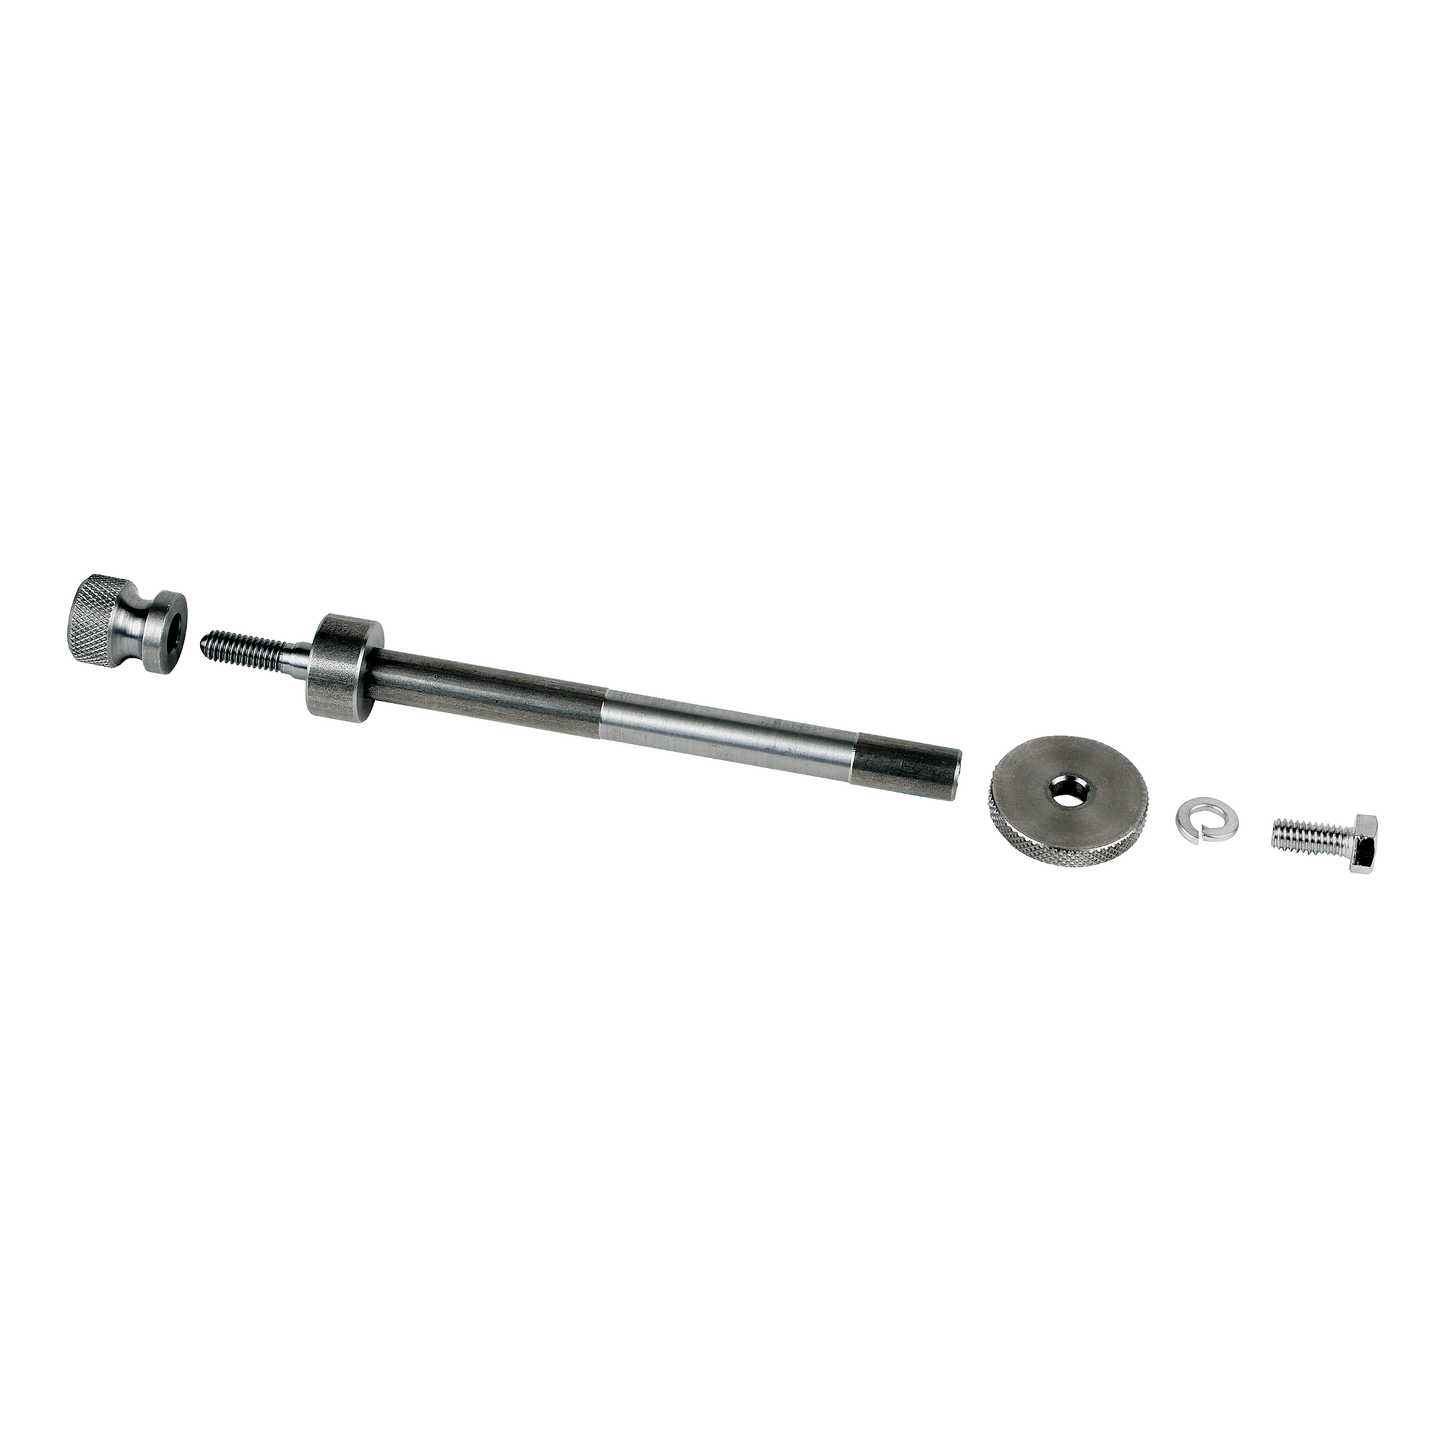 SM4 Scale Bar Spindle Kit (AX1489)